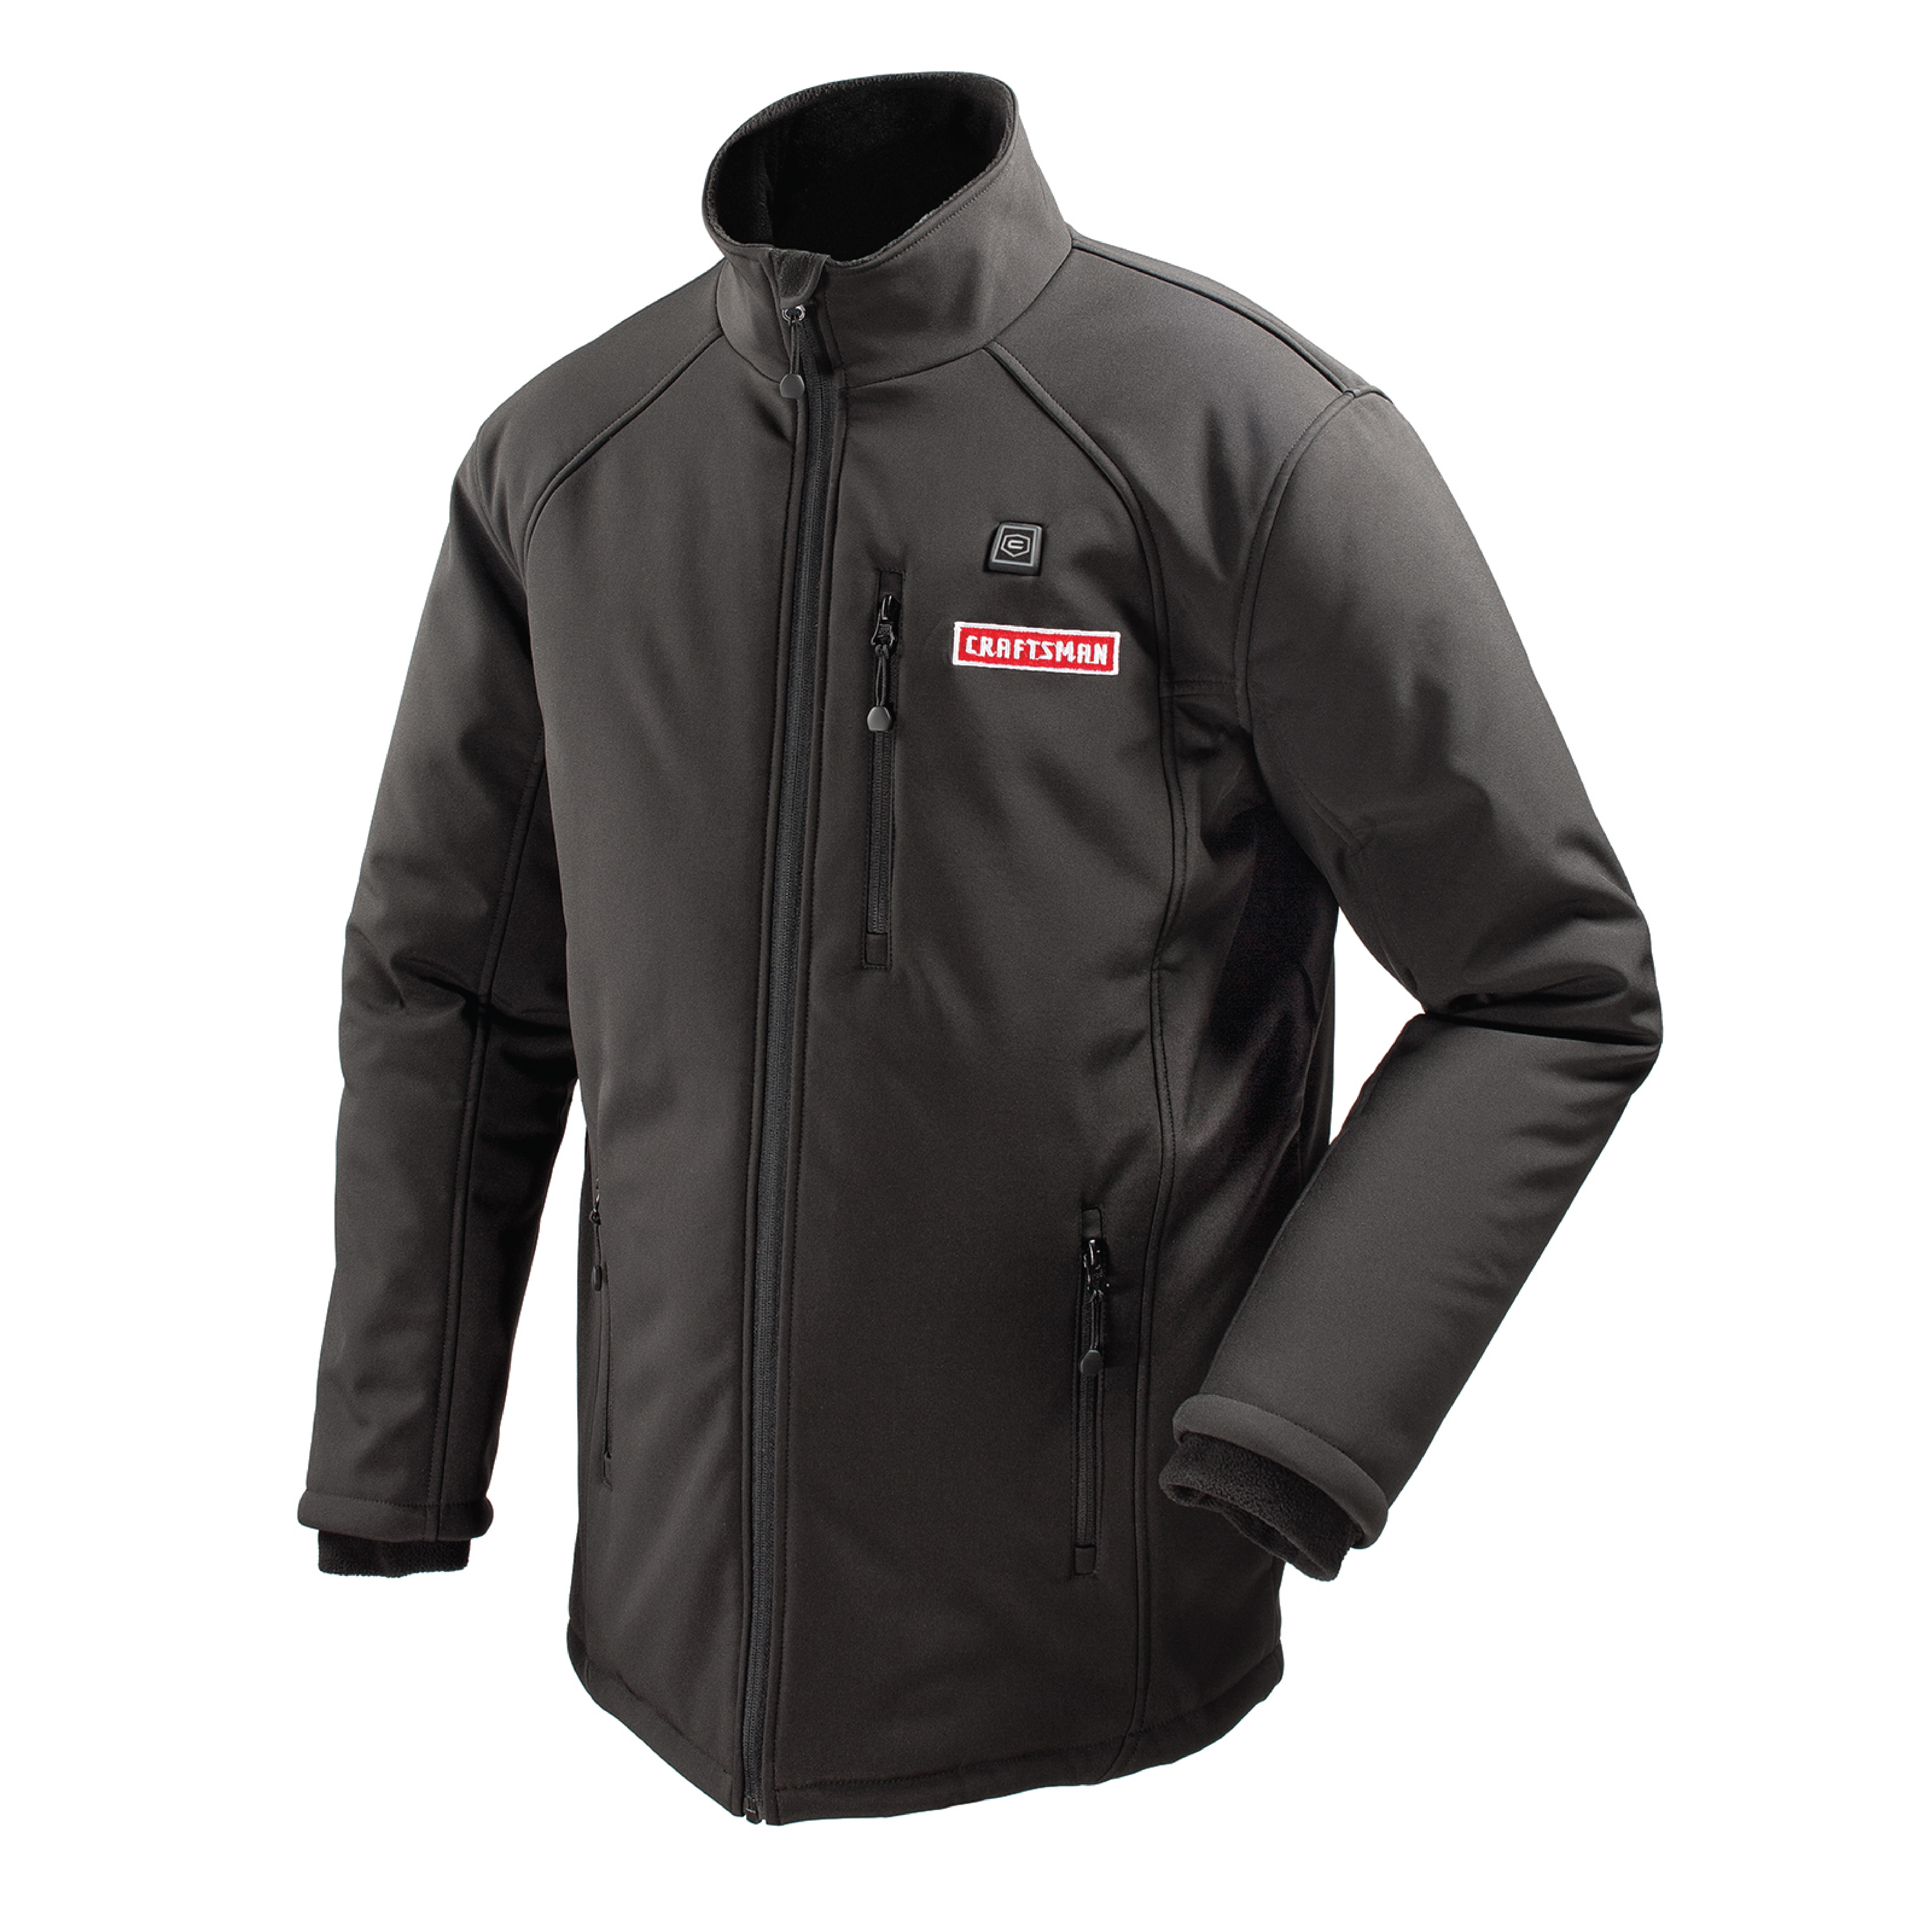 Craftsman Men's Black Heated Jacket (Battery and Charger Sold Separately)